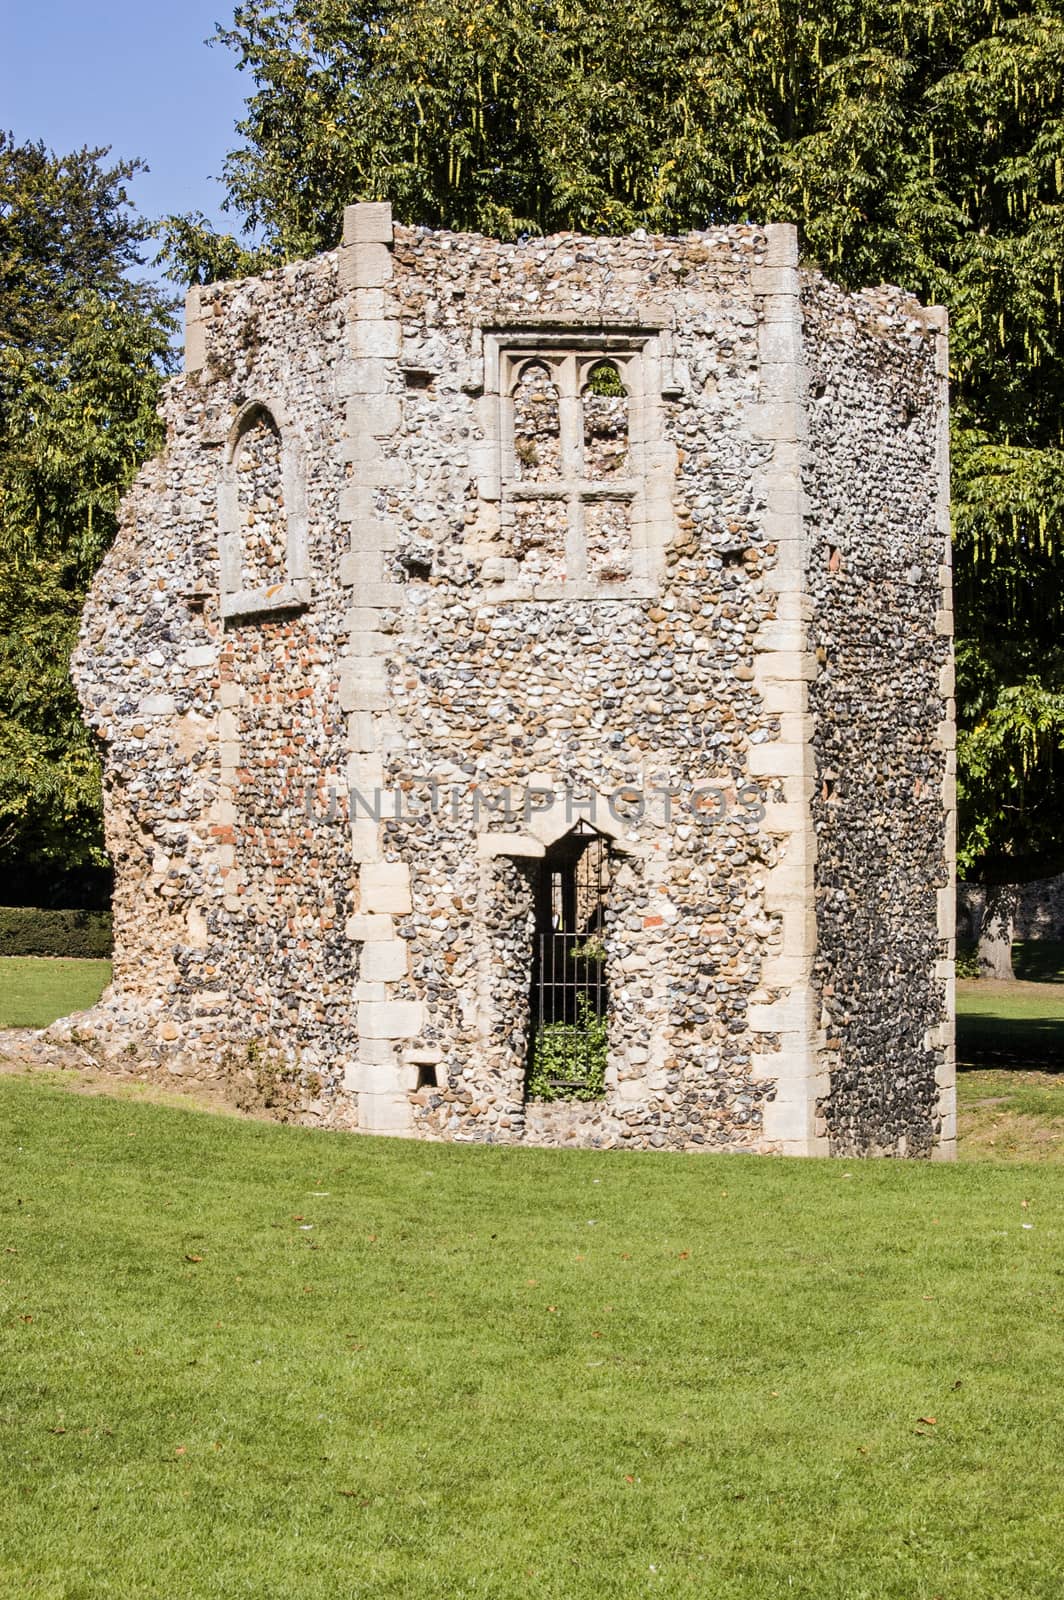 Ruins of the Abbey Dovecote in Bury St Edmunds, Suffolk.